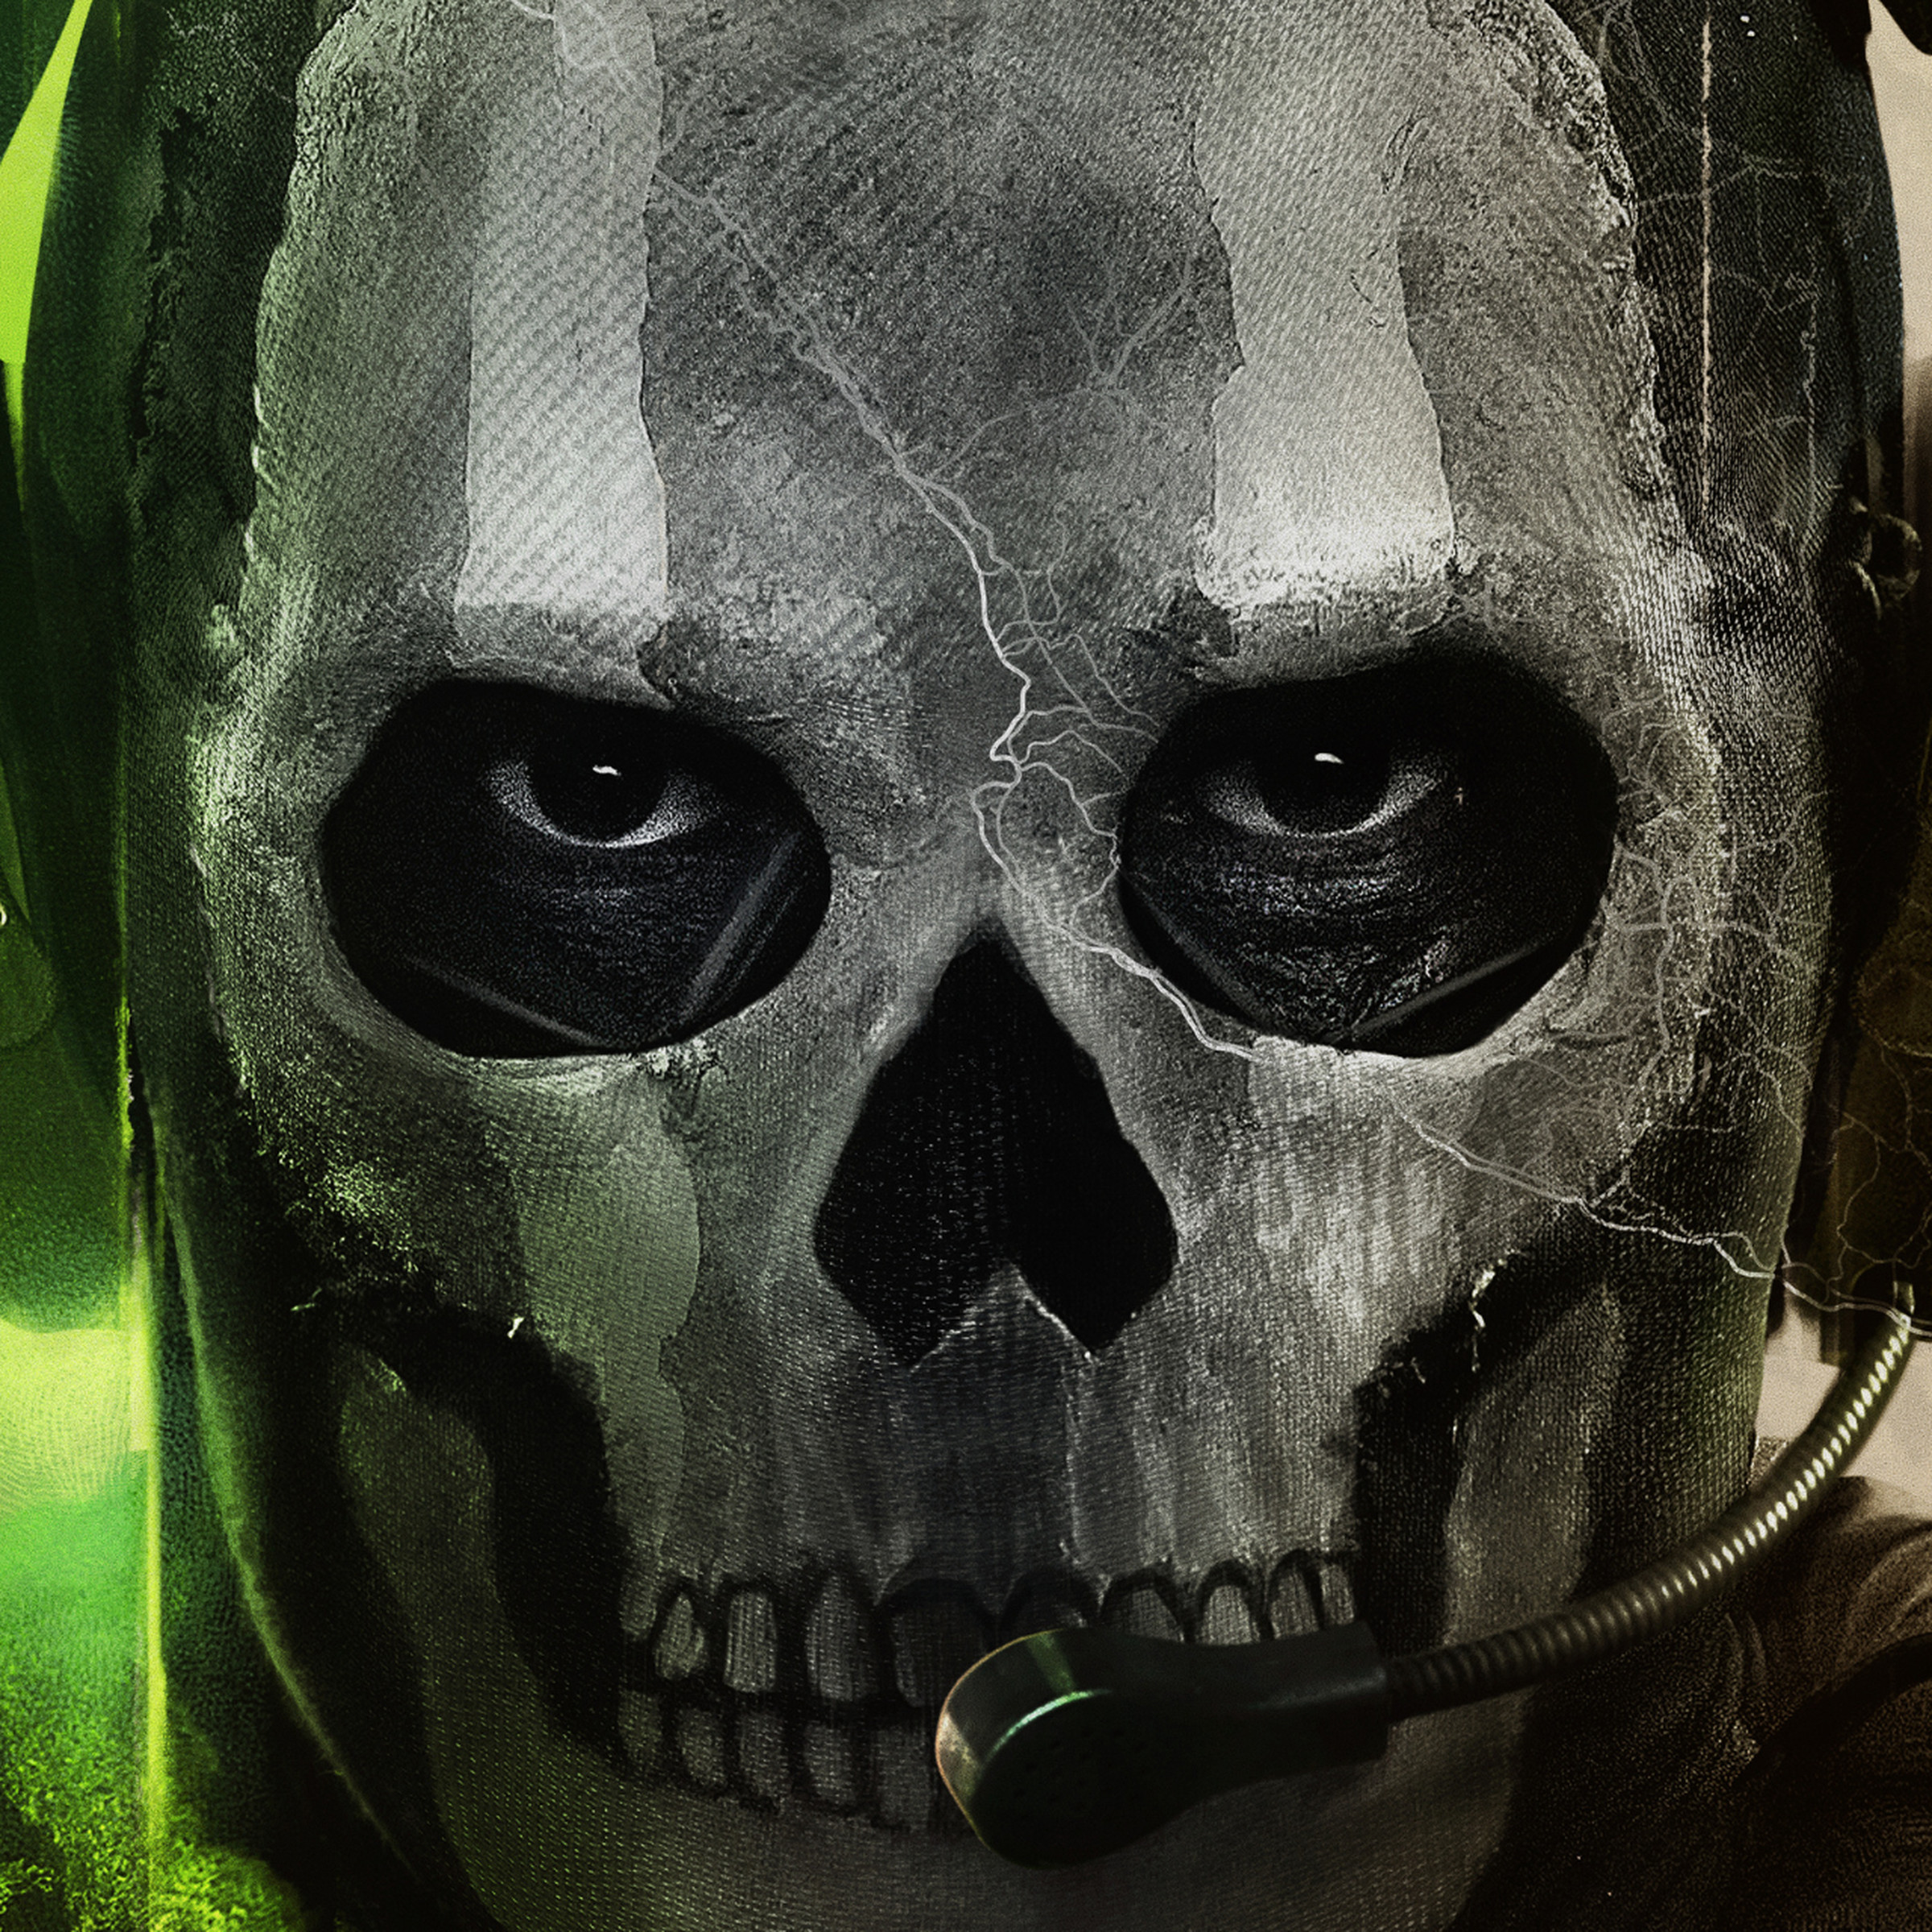 Key art from Modern Warfare II featuring a close up of Simon “Ghost” Riley, a soldier in a tactical skull mask wearing headphones and eyeblack